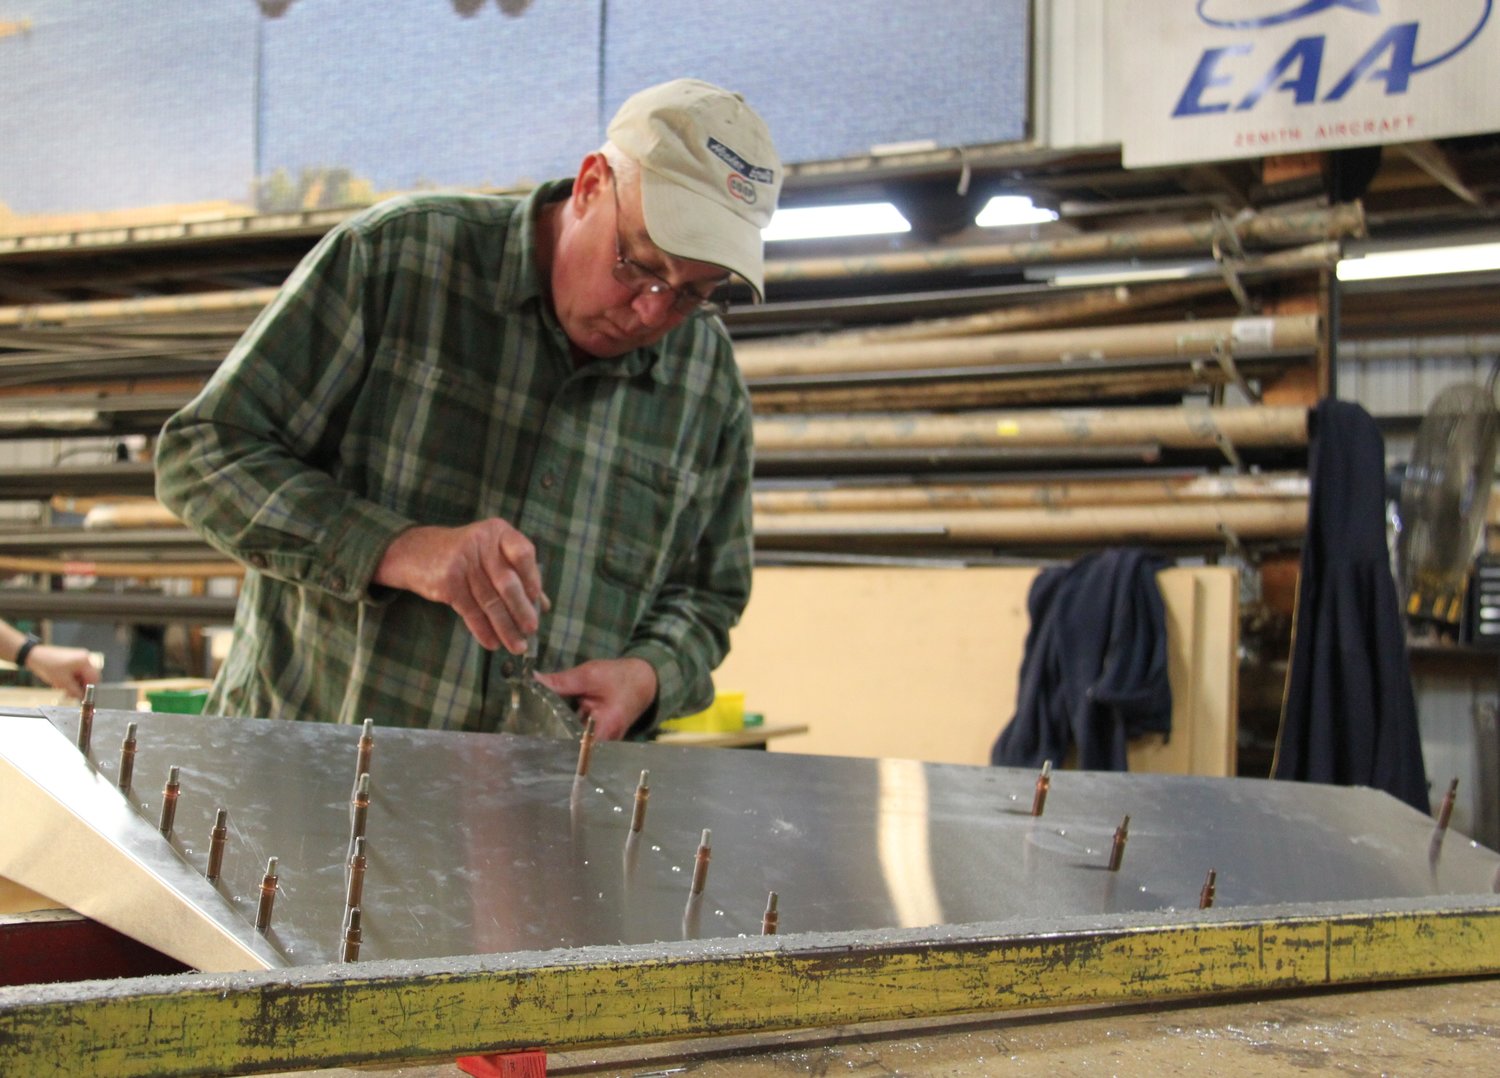 Chris Carstens inspects his first go at working with sheet metal during a recent workshop. [Dave Faries]